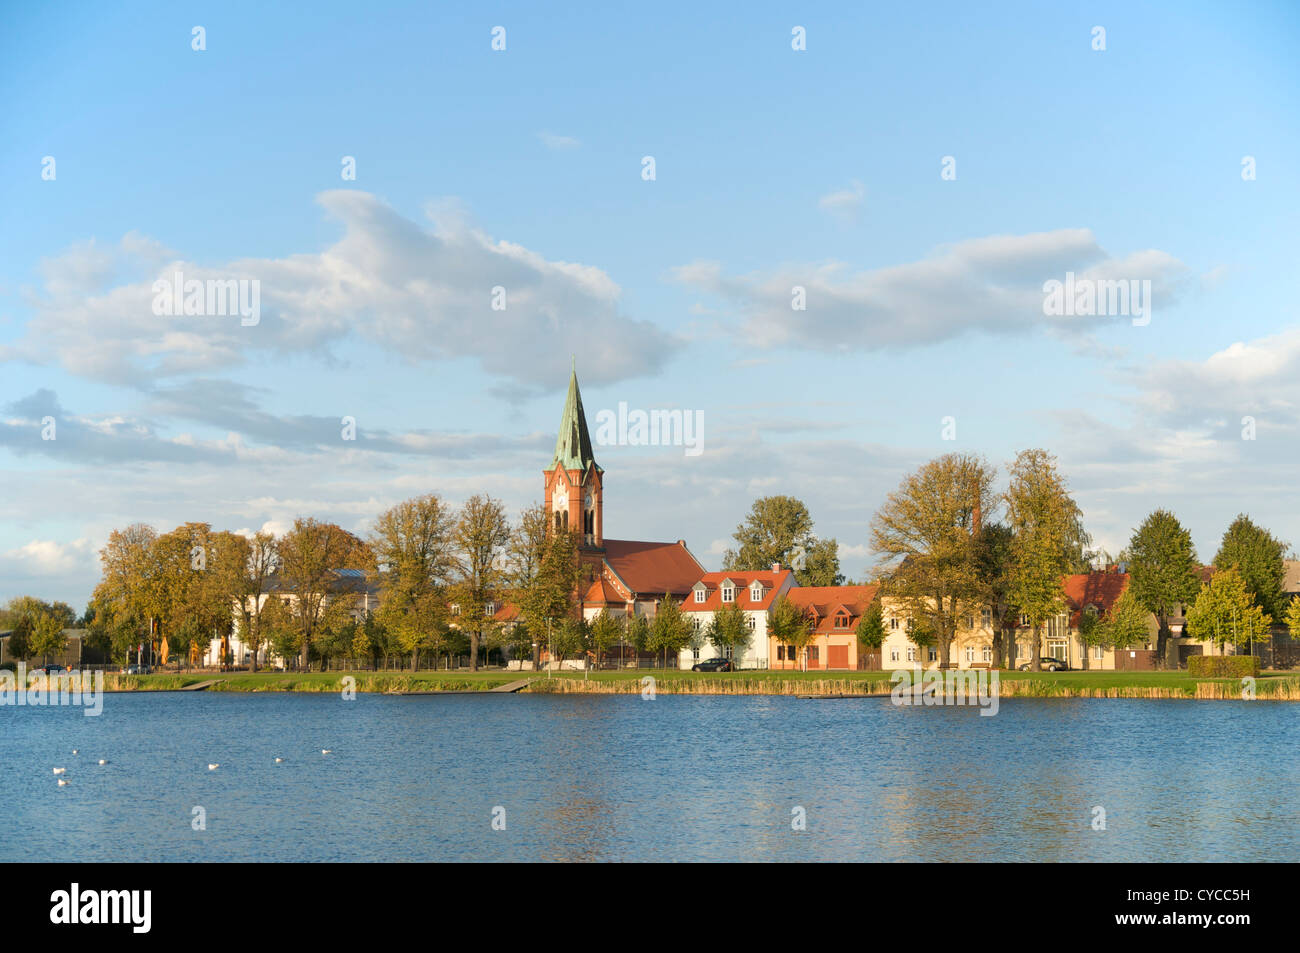 Waterfront view of Werder upon Havel with the Catholic church Maria Meeresstern in the old quarter on an island. Stock Photo